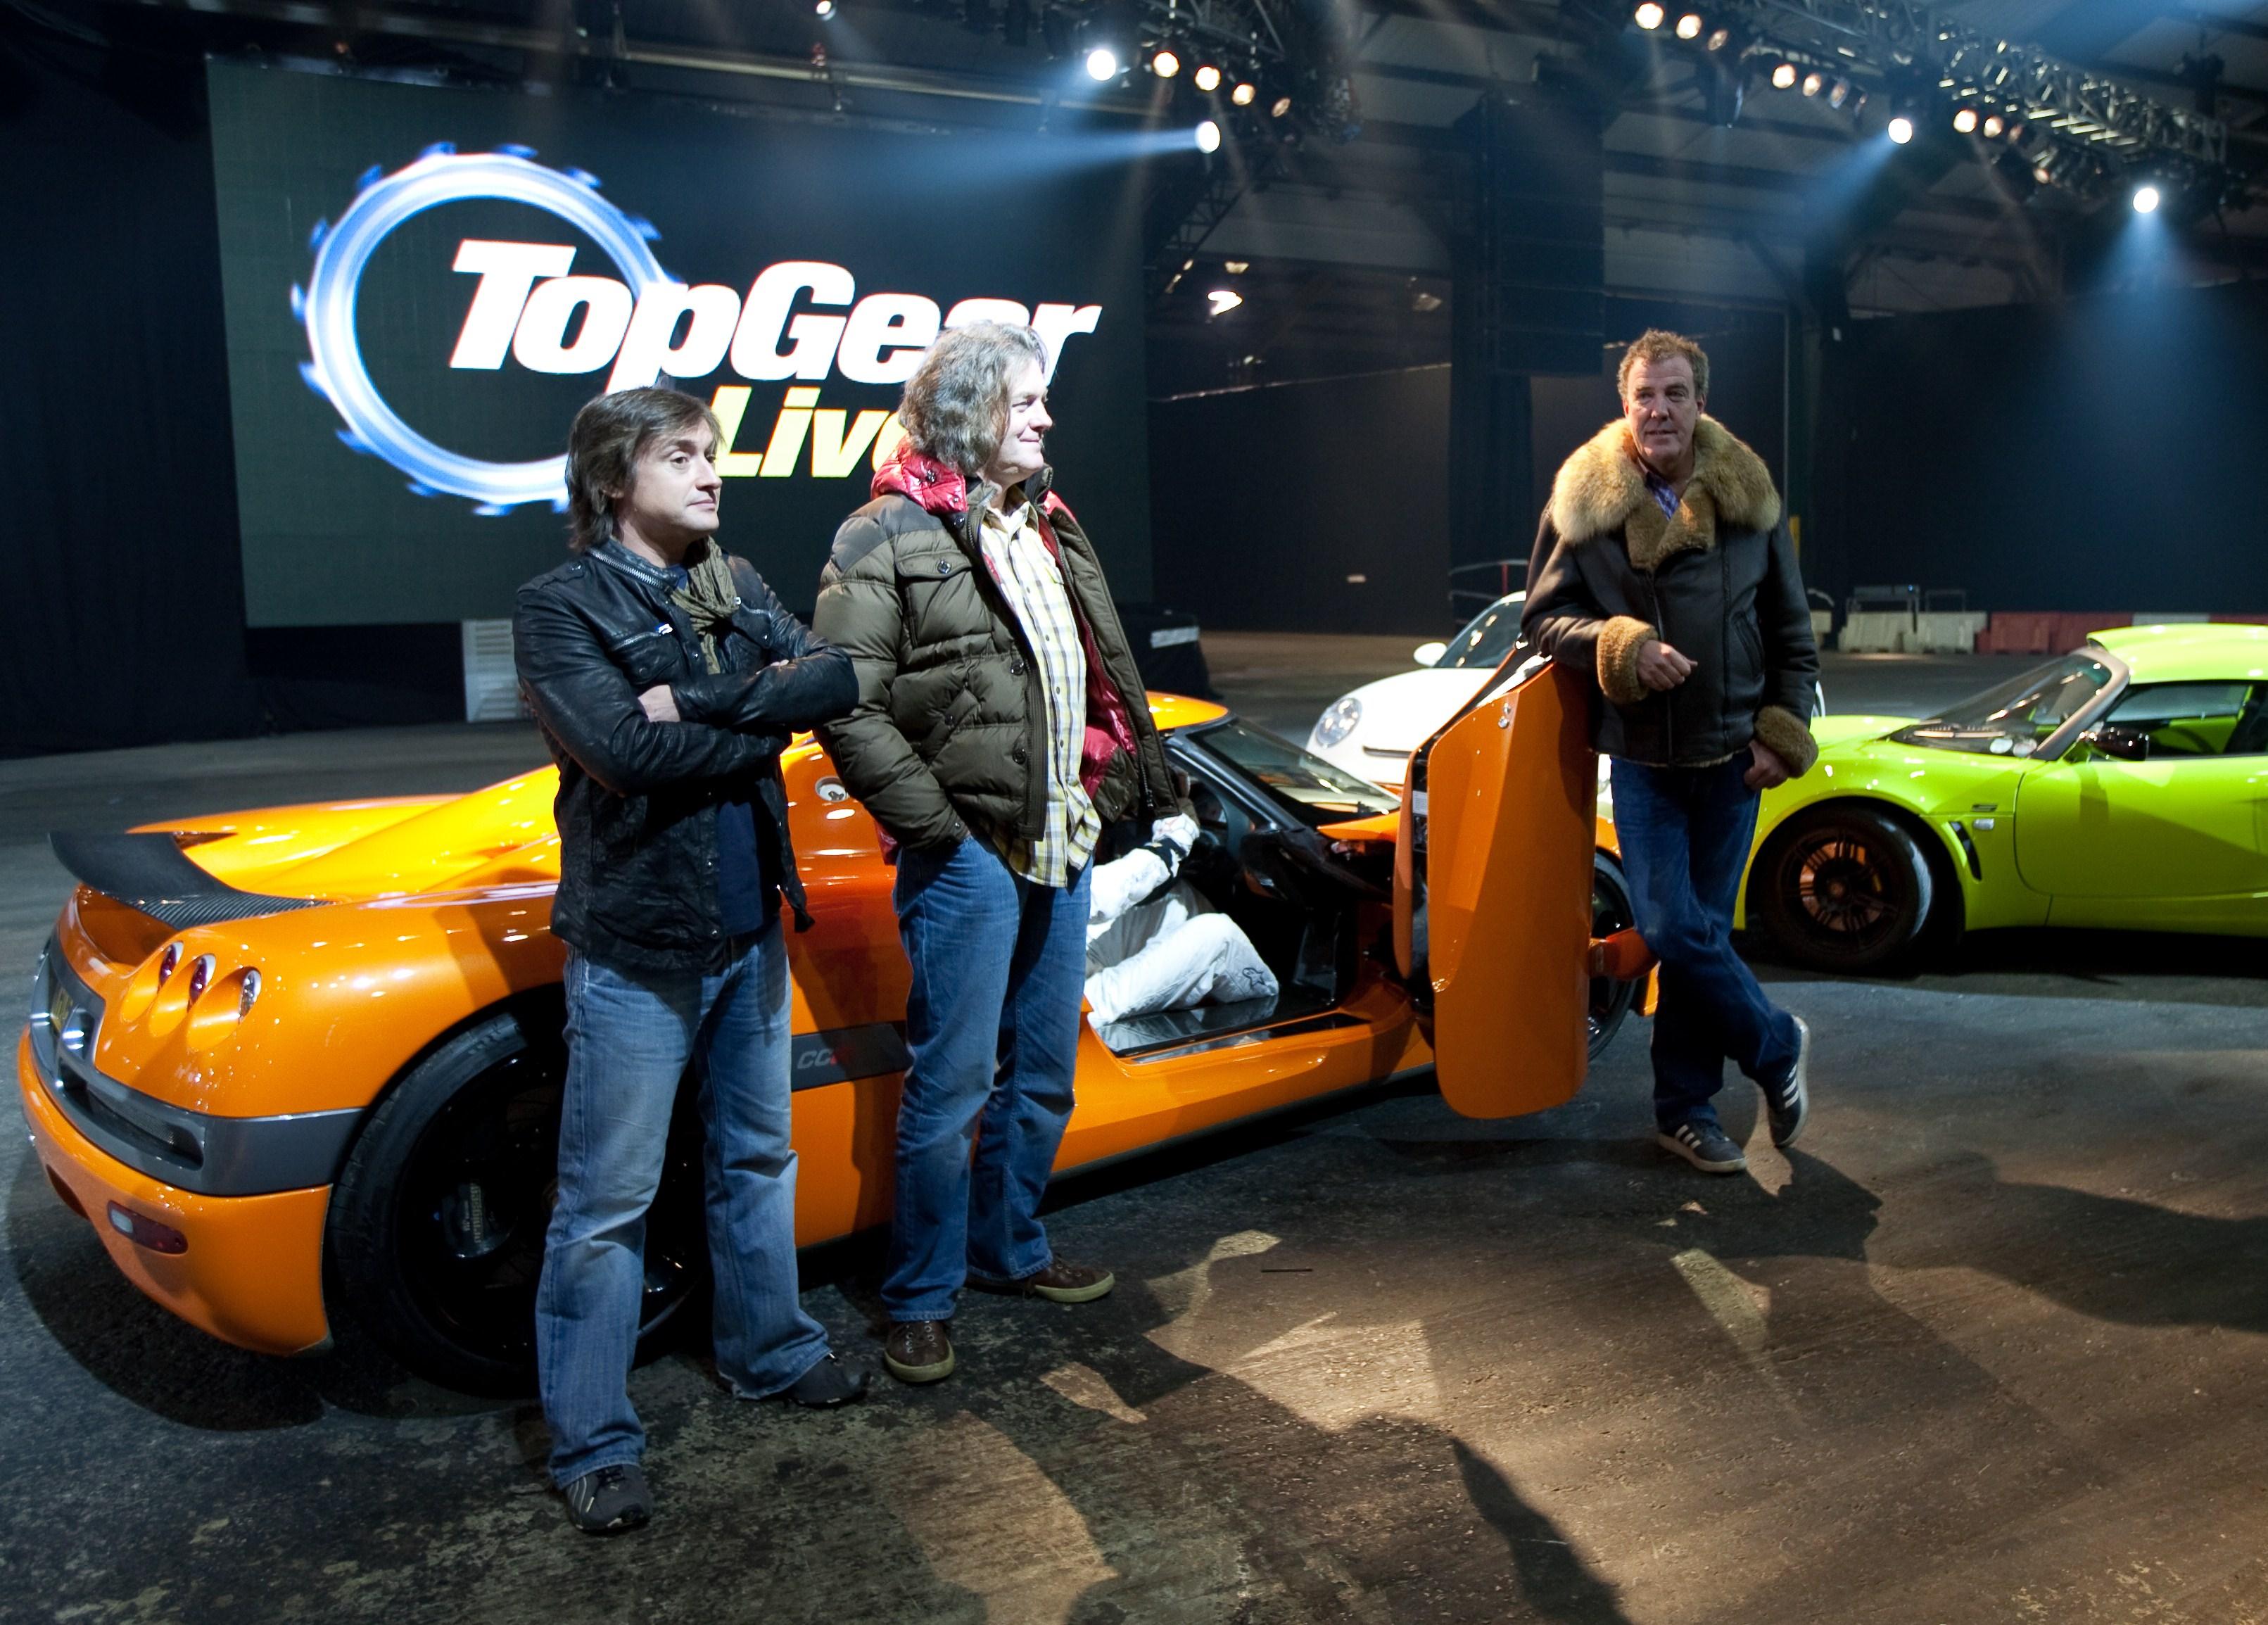 Top gear dudes - (#80654) - High Quality and Resolution Wallpapers ...